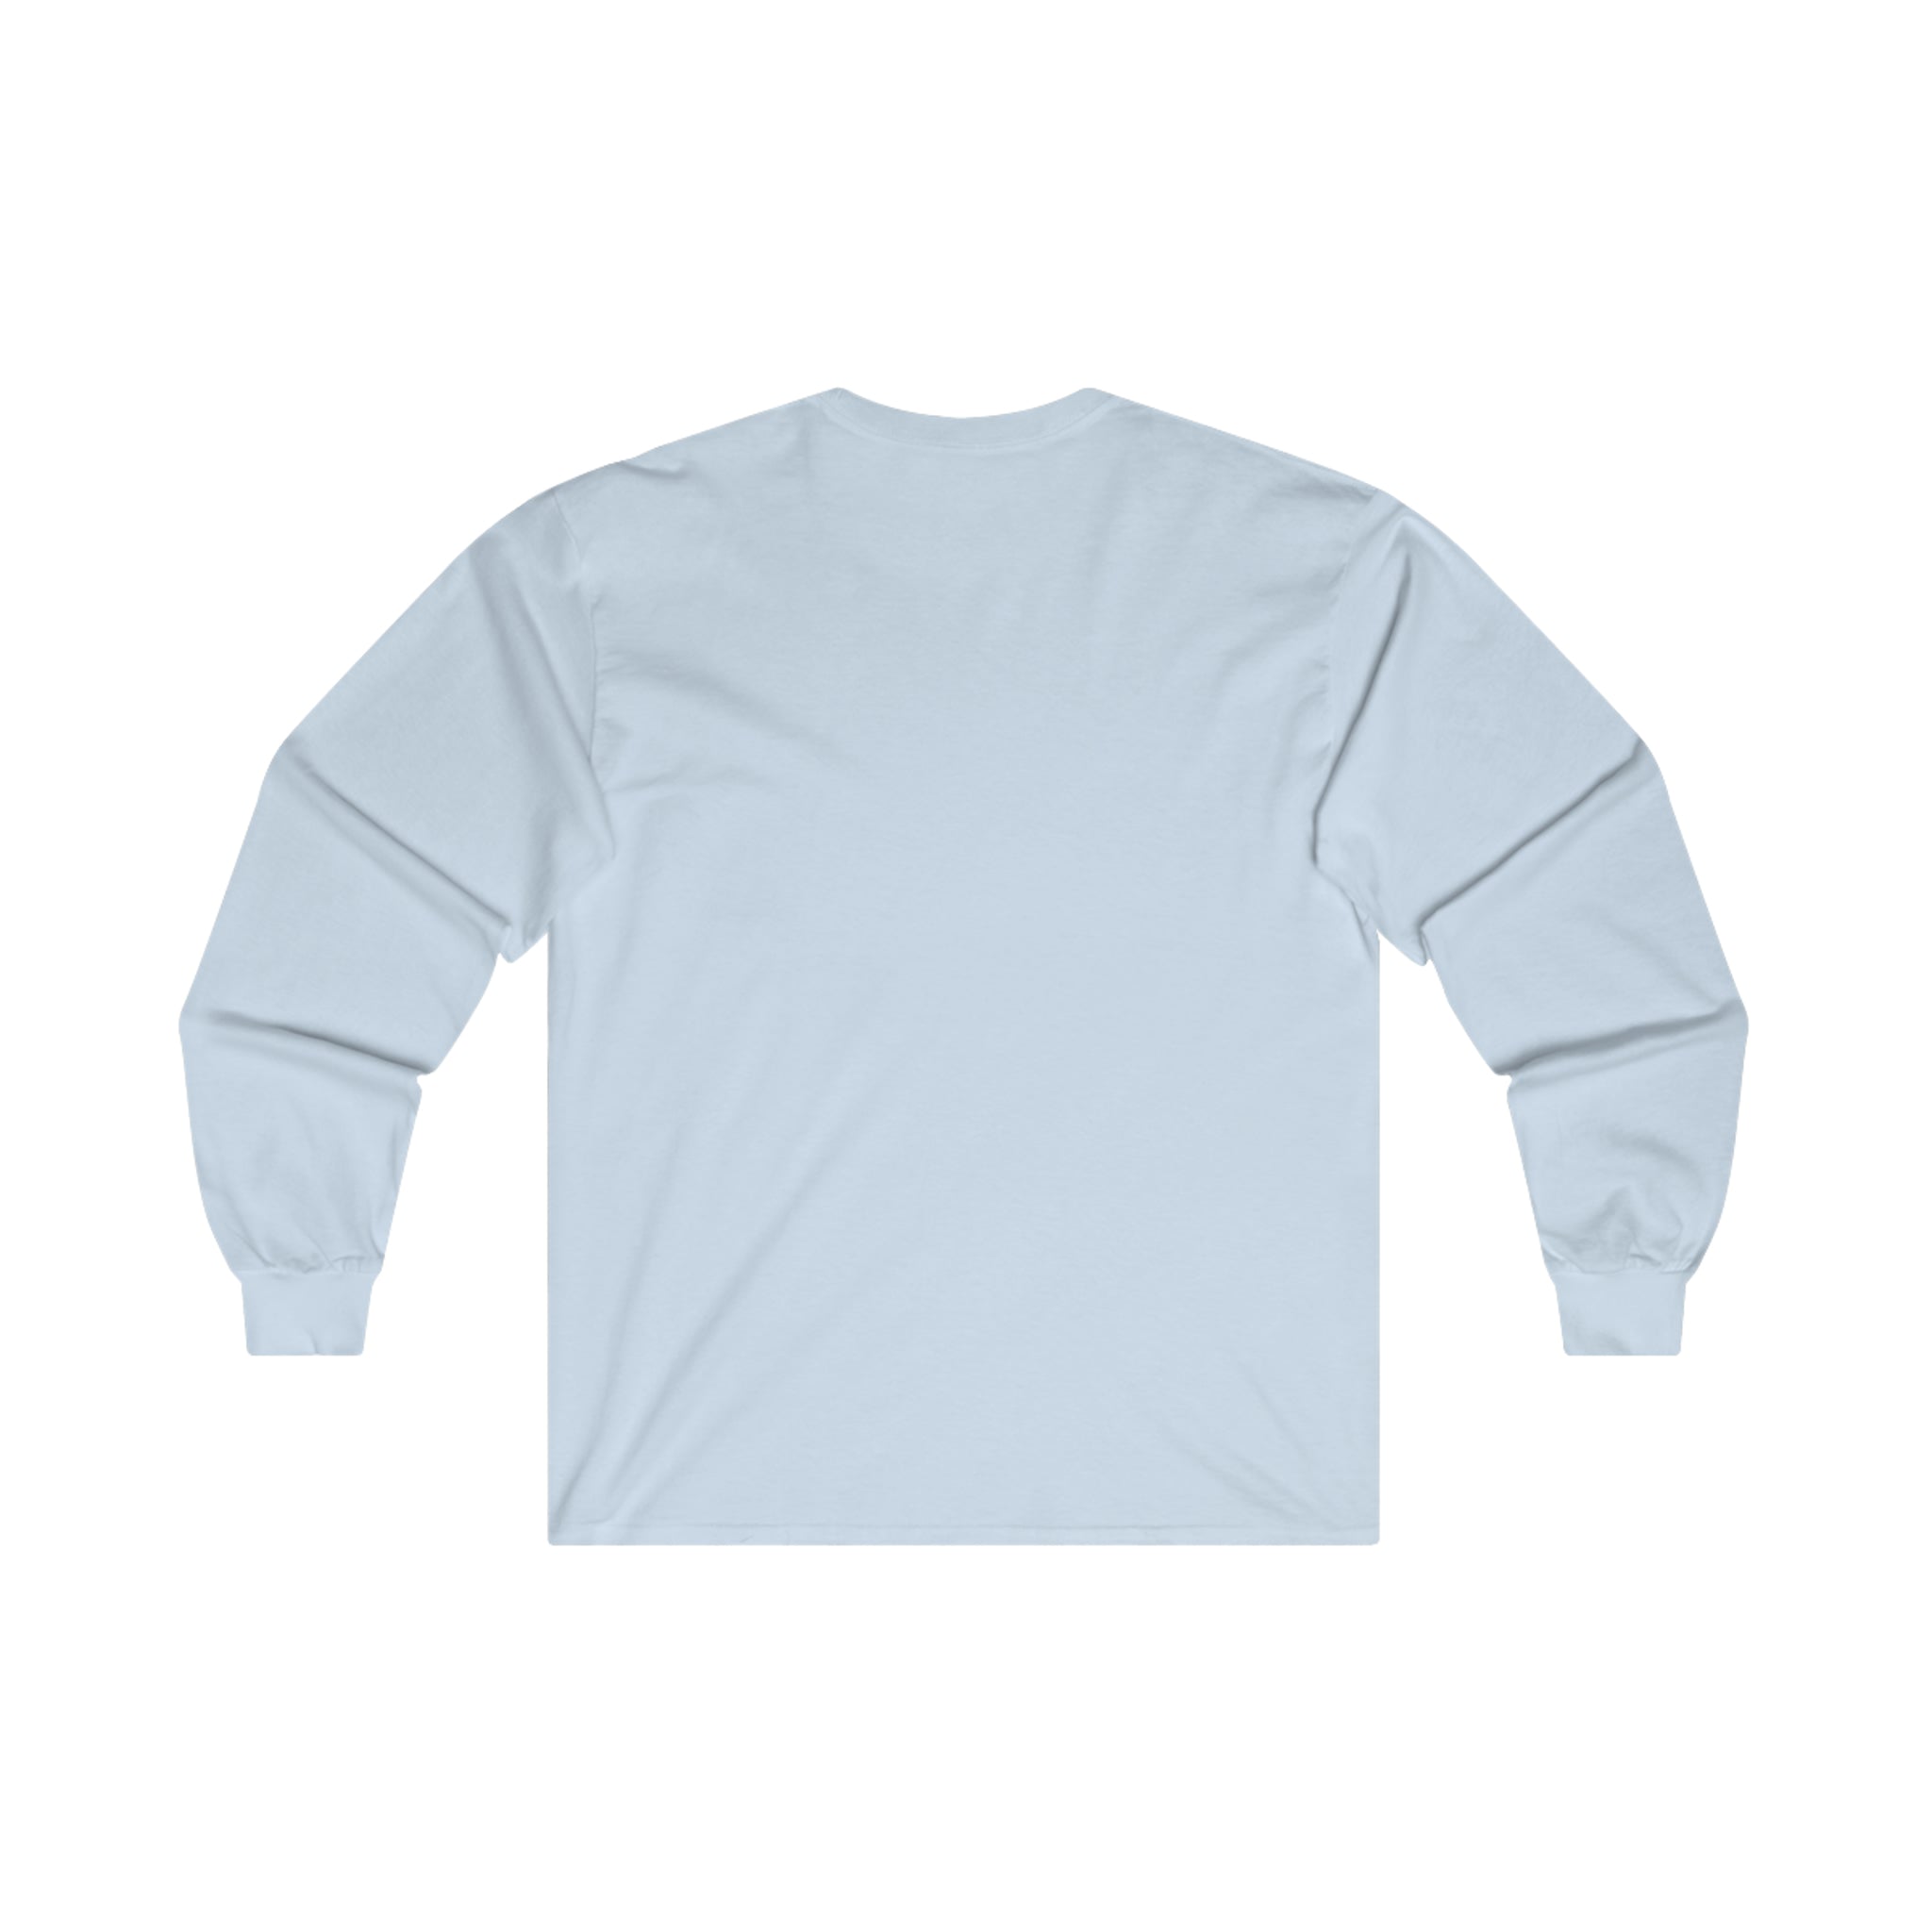 Gods Hand Passing Nicotine Pouches - Ultra Cotton Long Sleeve Tee